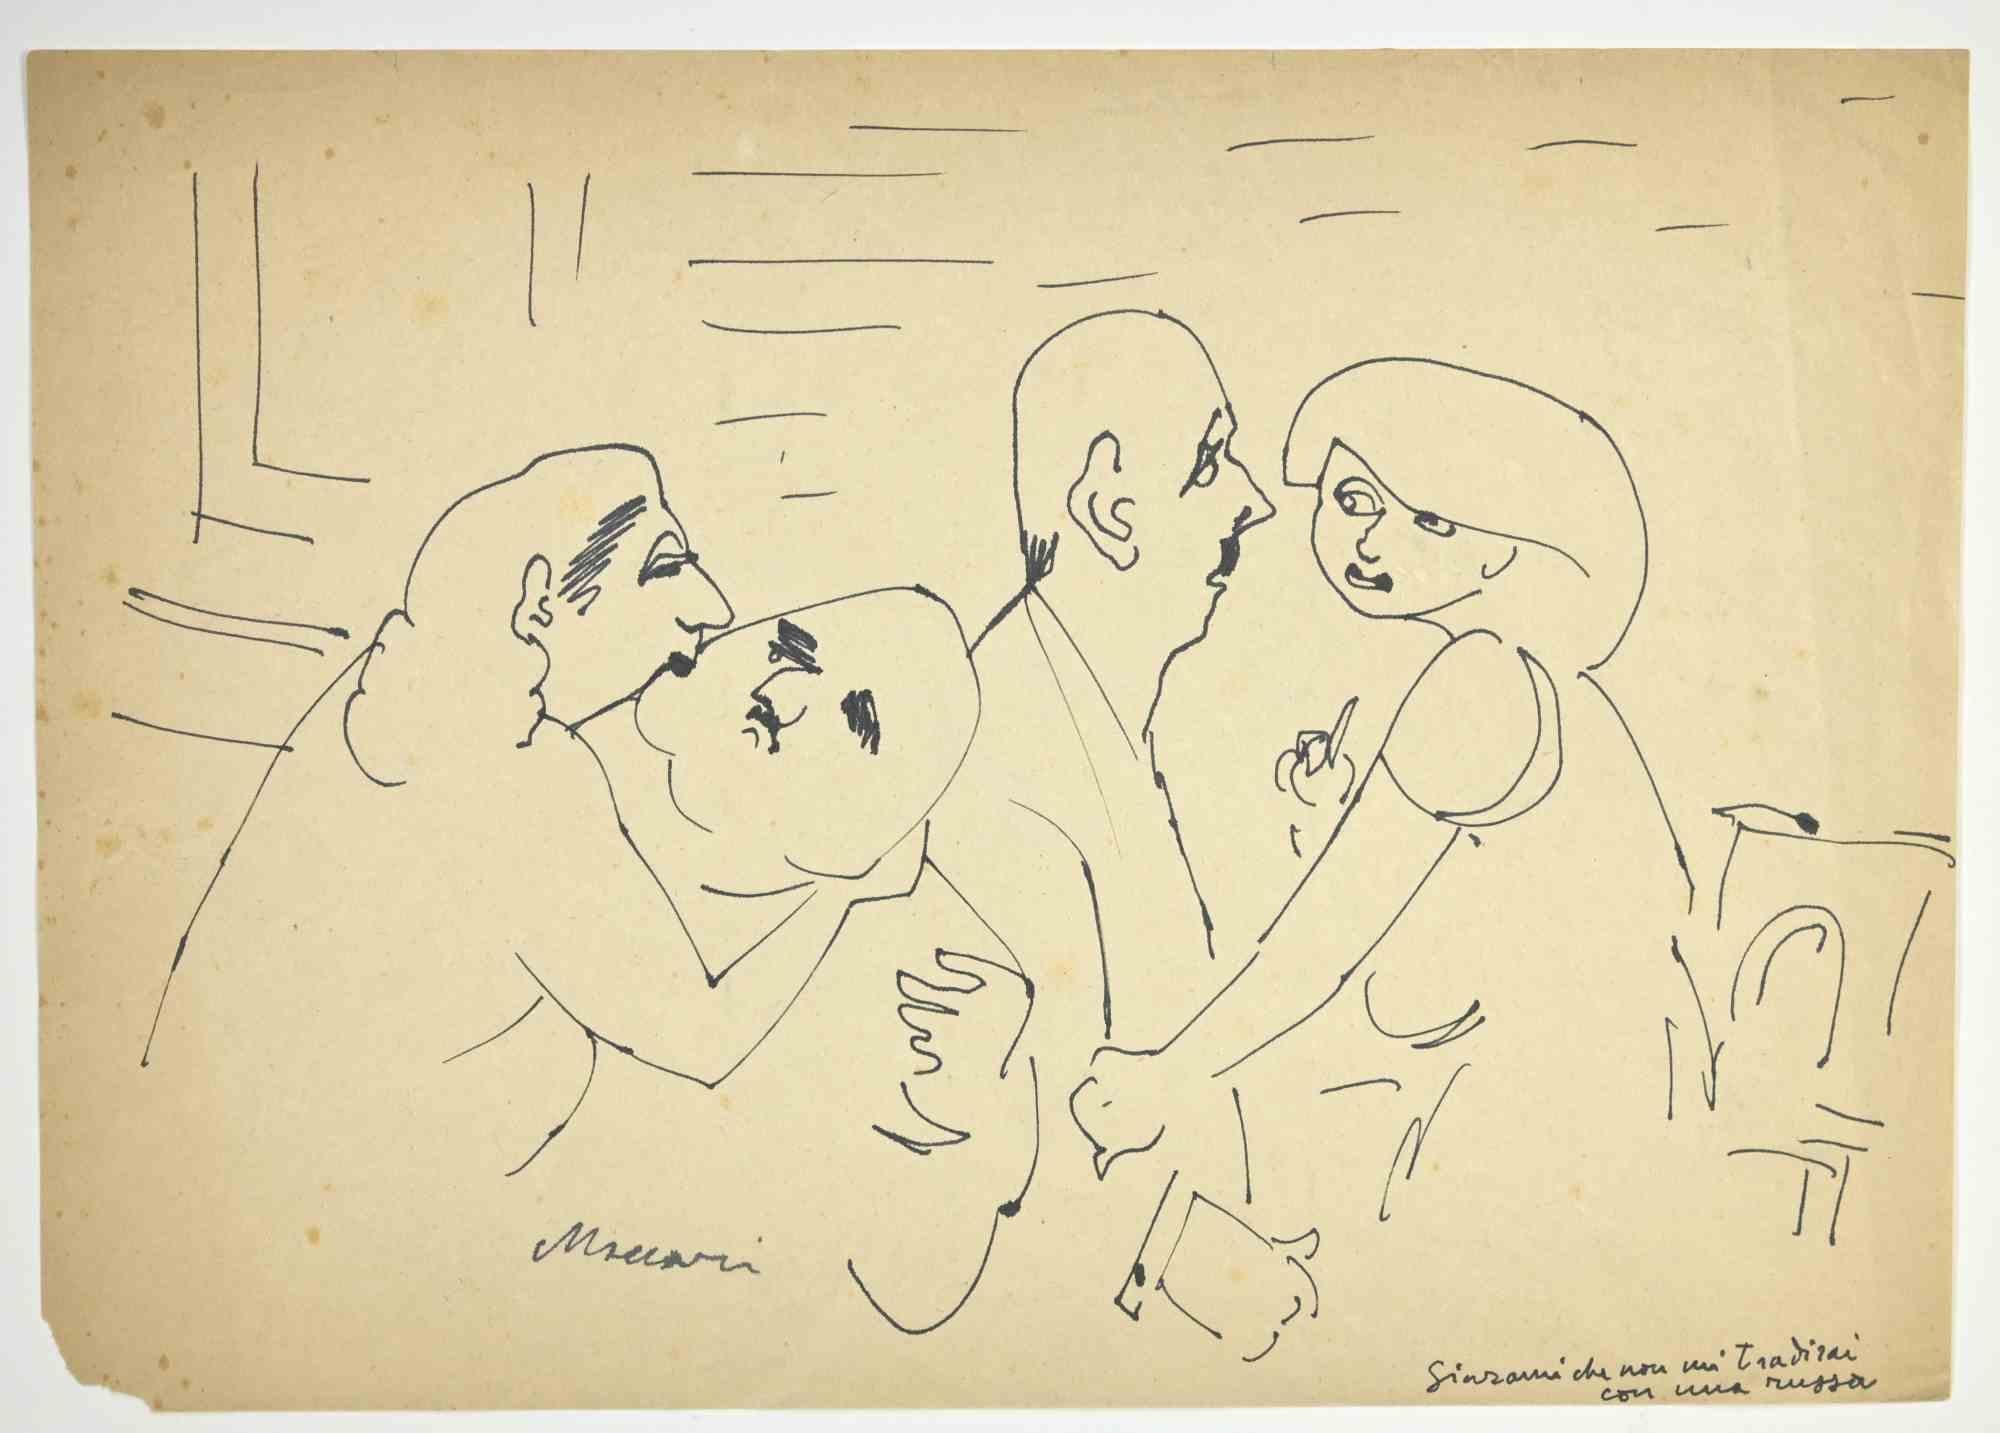 Figures is a China ink Drawing realized by Mino Maccari  (1924-1989) in the 1960s.

Hand-signed on the lower, titled in Italian n the lower right.

Good condition with a small missing piece of paper on the lower left margin.

Mino Maccari (Siena,